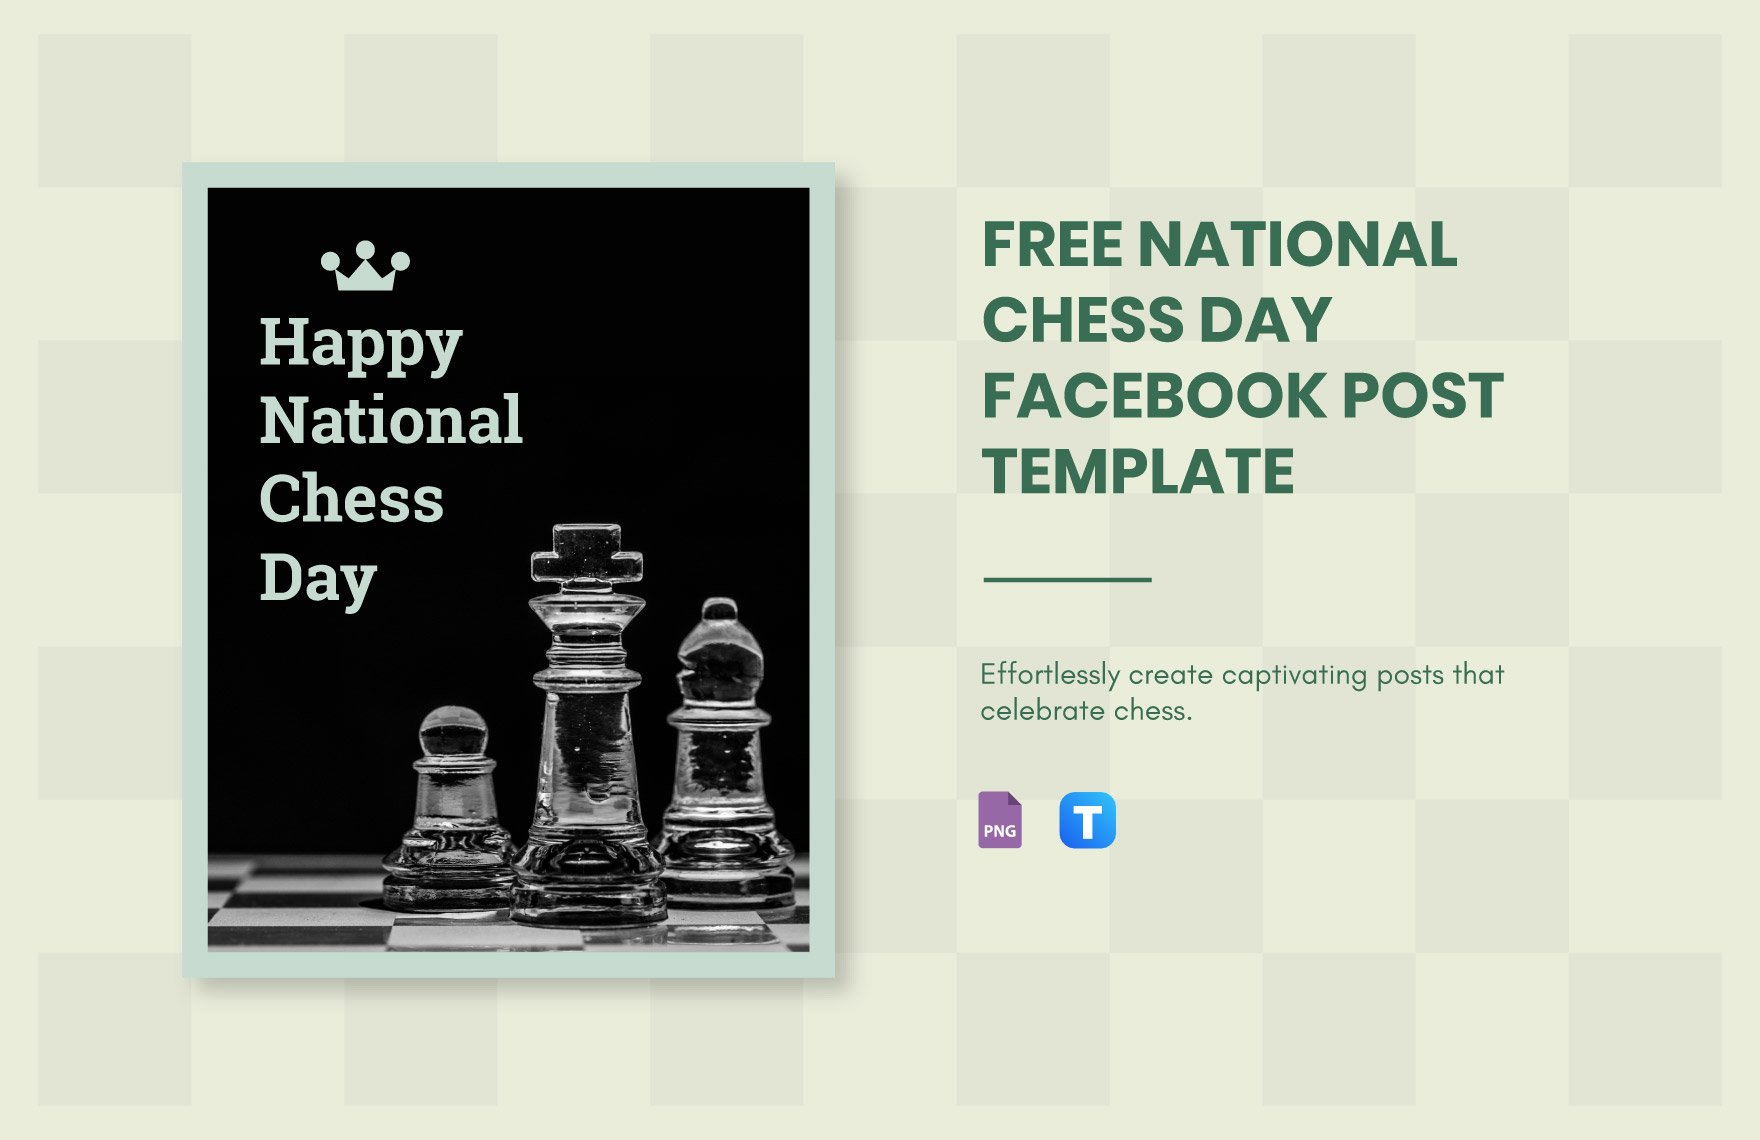 Free National Chess Day Facebook Post Template in PNG